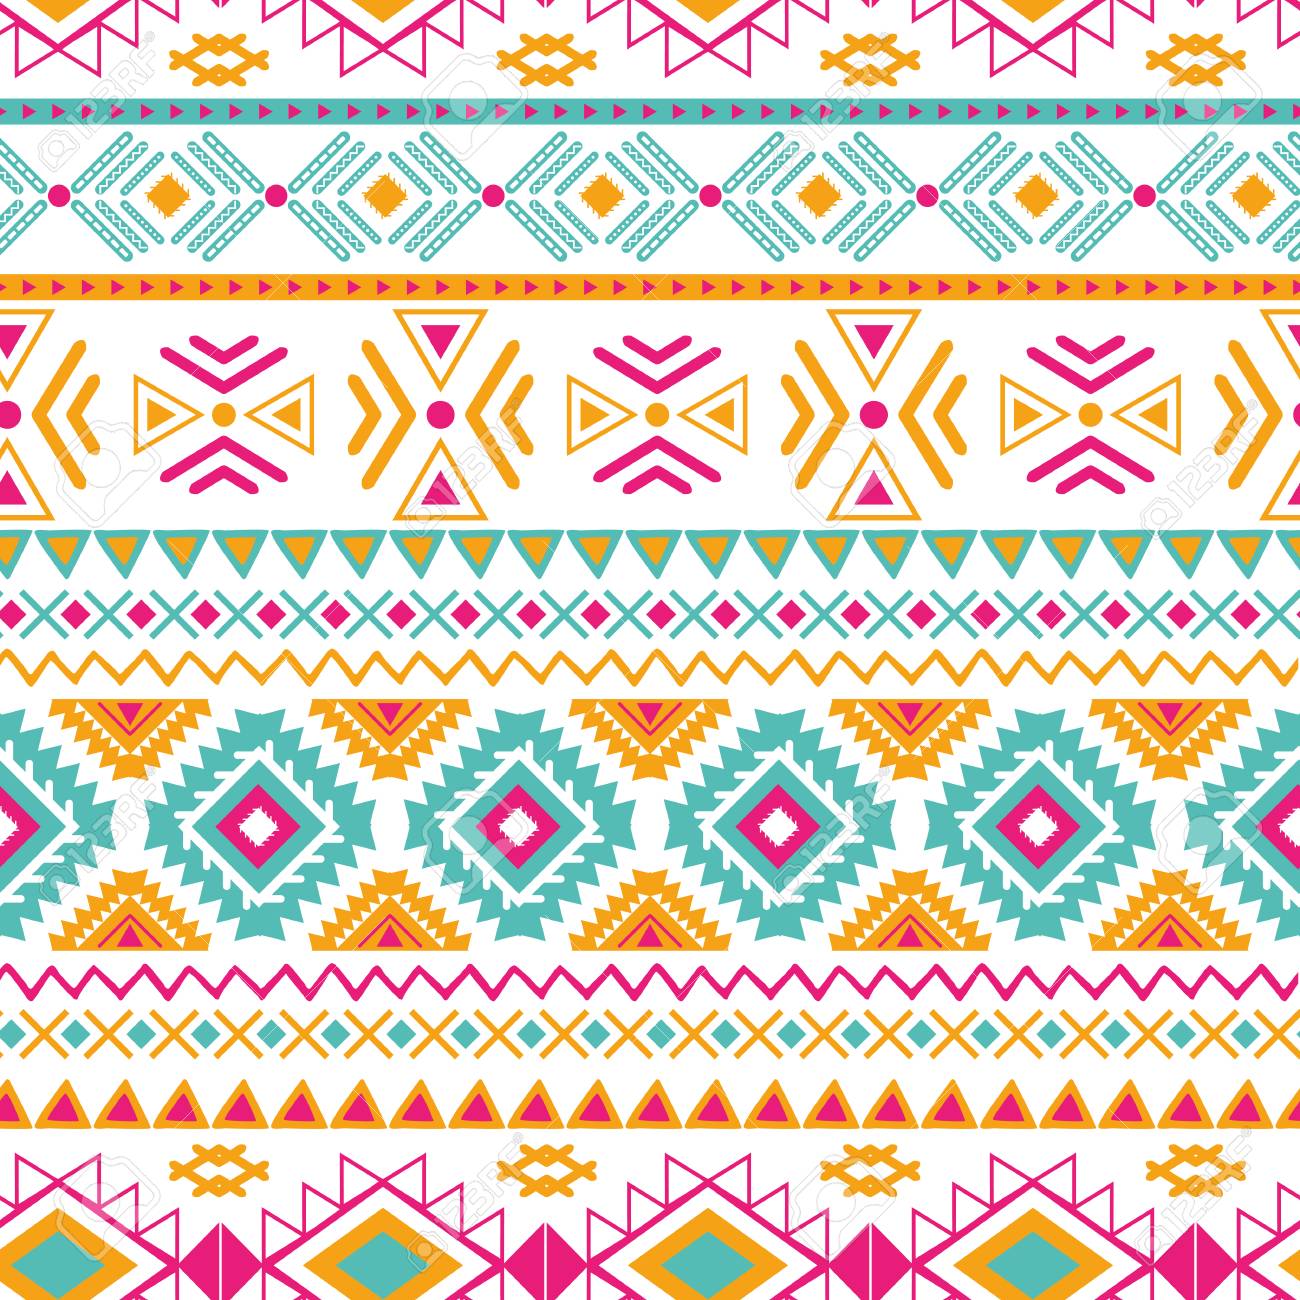 Vector Tribal Ethnic Seamless Pattern In Bright Pink Orange Colors